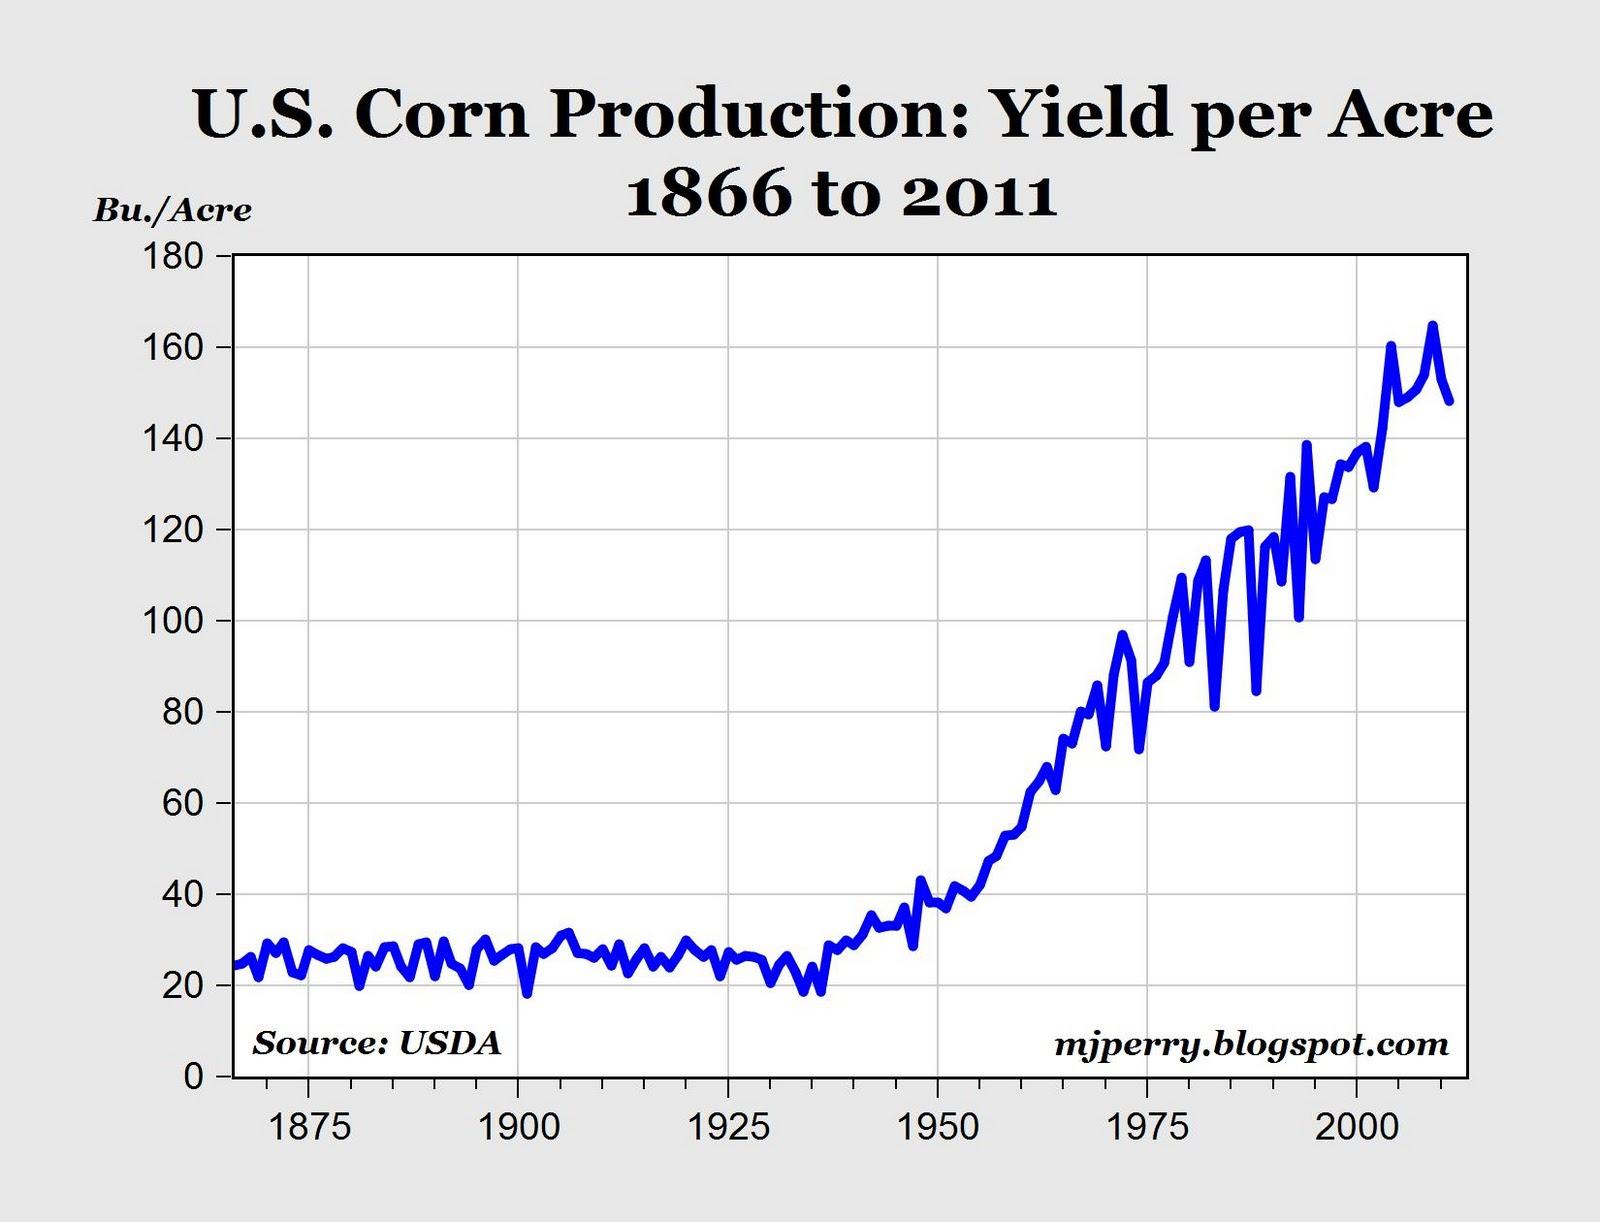 U.S. Corn Yields Increased 6 Times Since 1930s And Are Estimated To